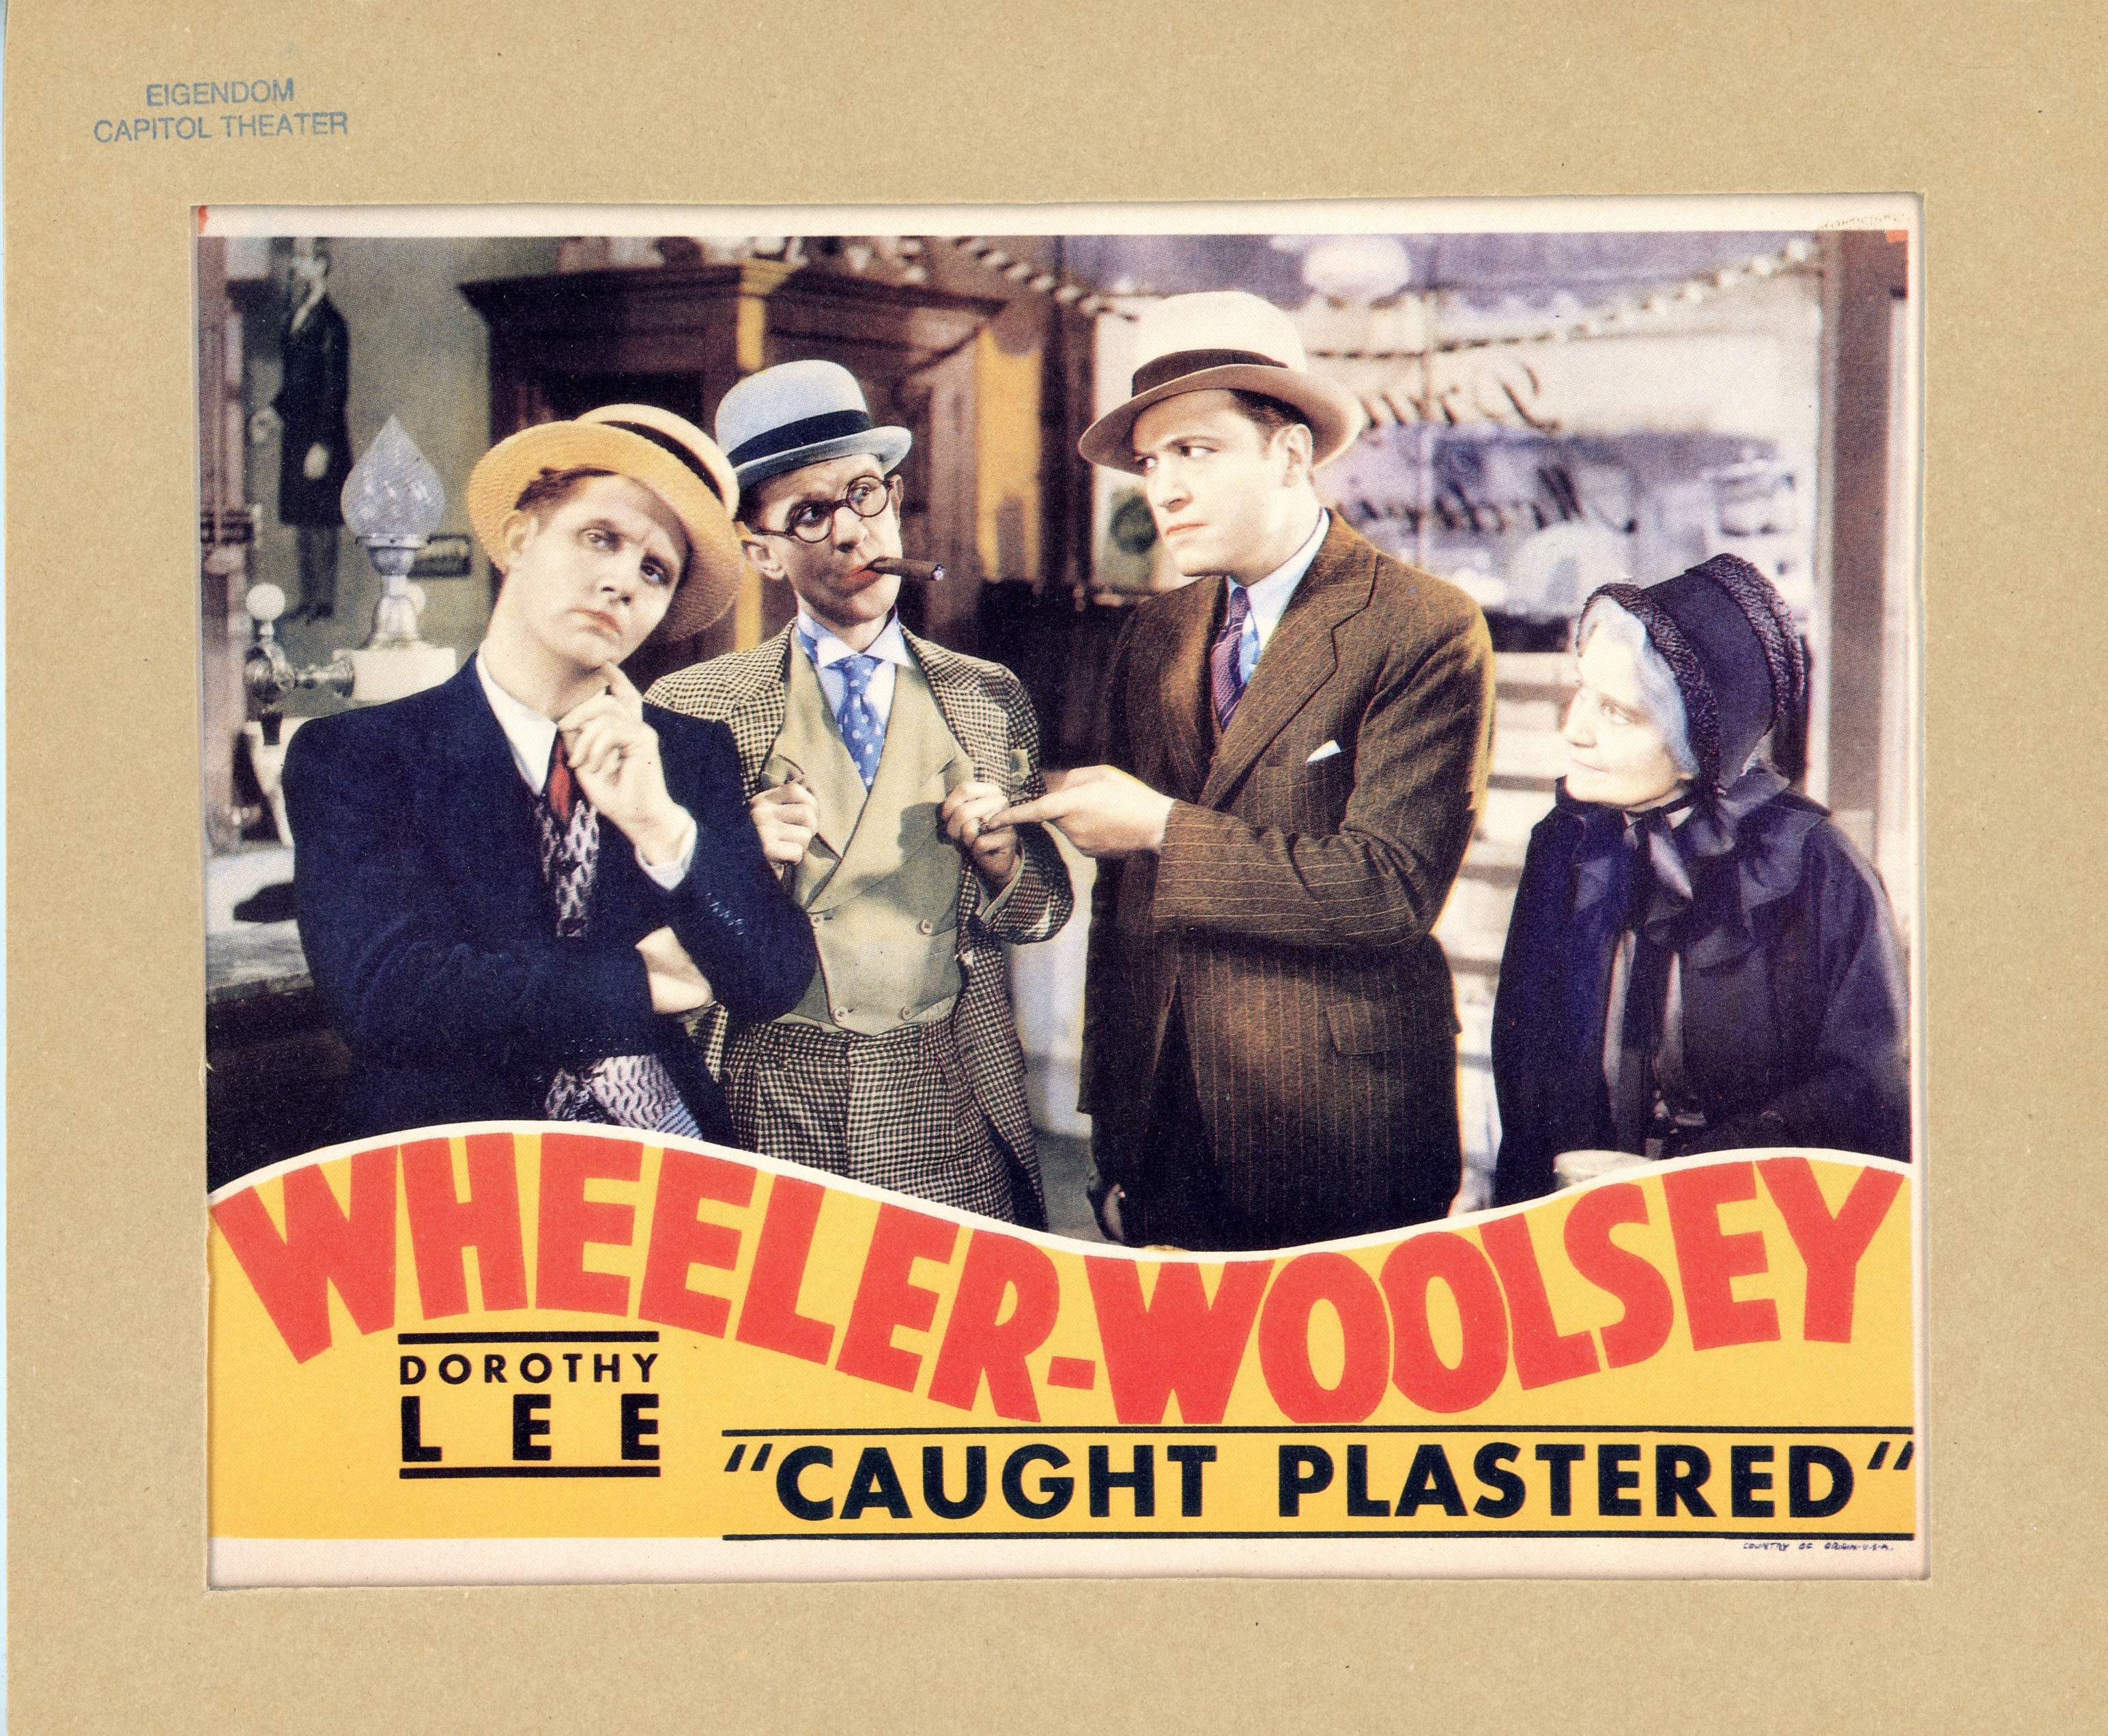 Lobby card, Caught Plastered, 1931